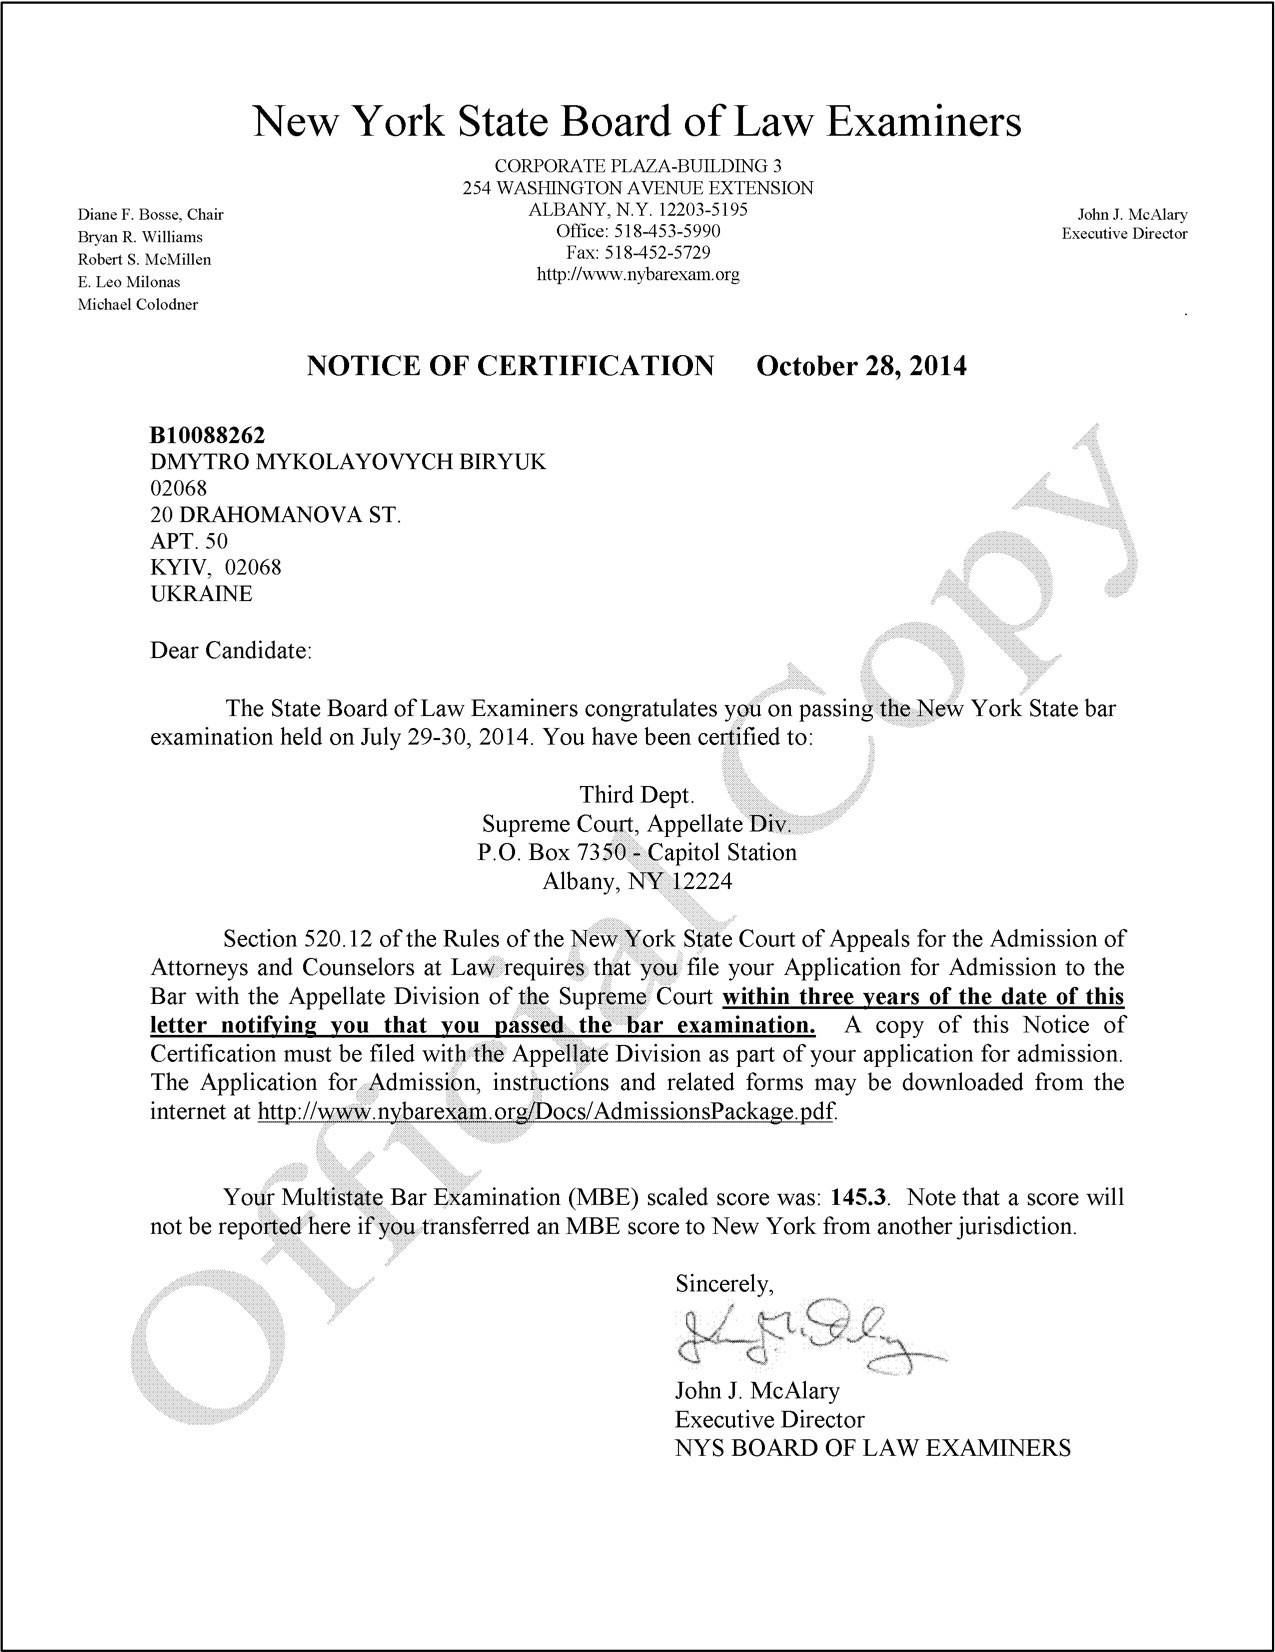 Notice of Certification of Dmytro Biryuk by New York State Board of Law Examiners